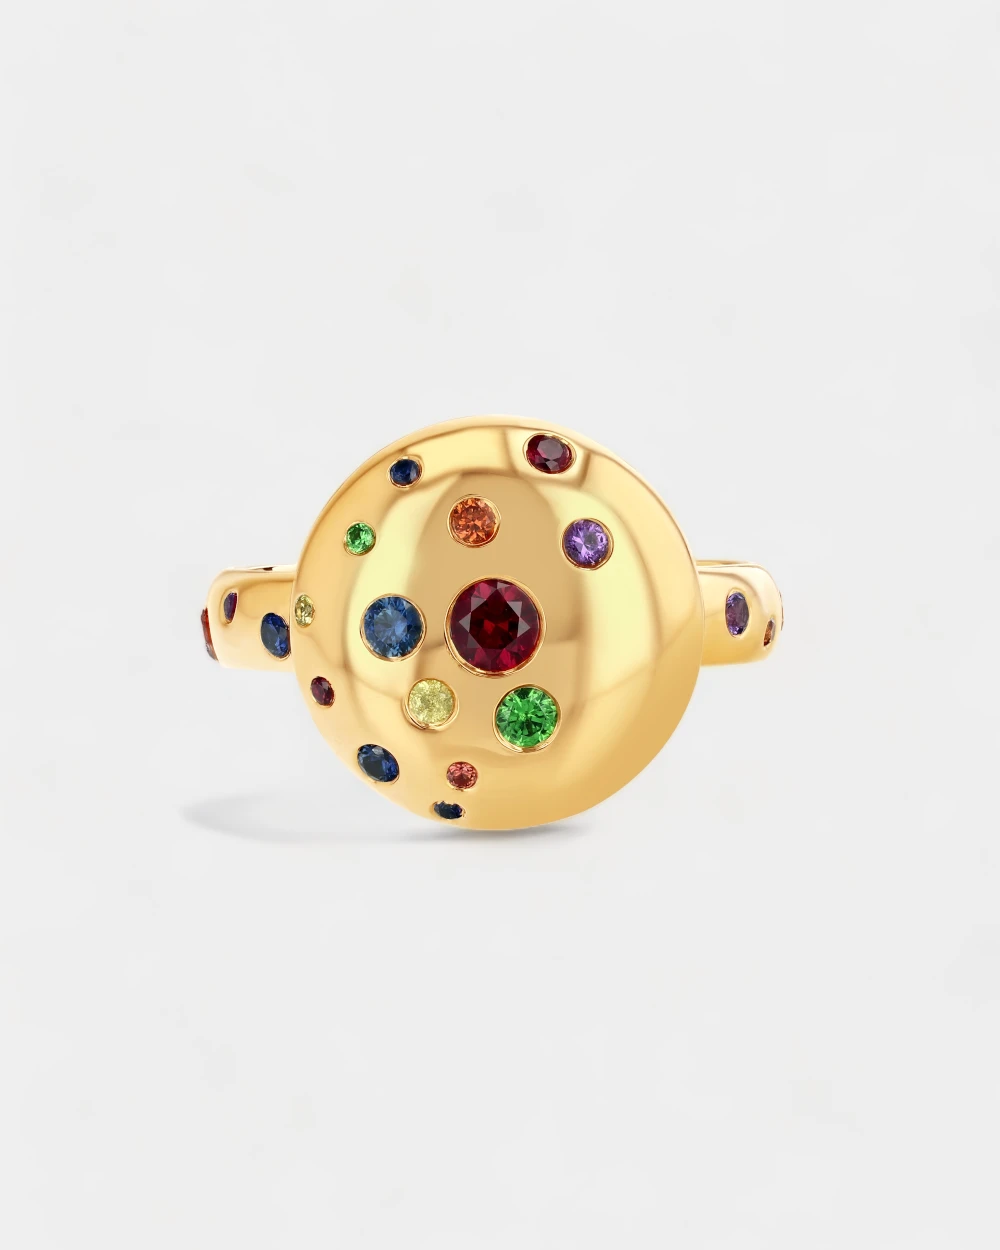 0.65 CT Diamond Stars Multicolor Pinky Ring in 18K Yellow Gold